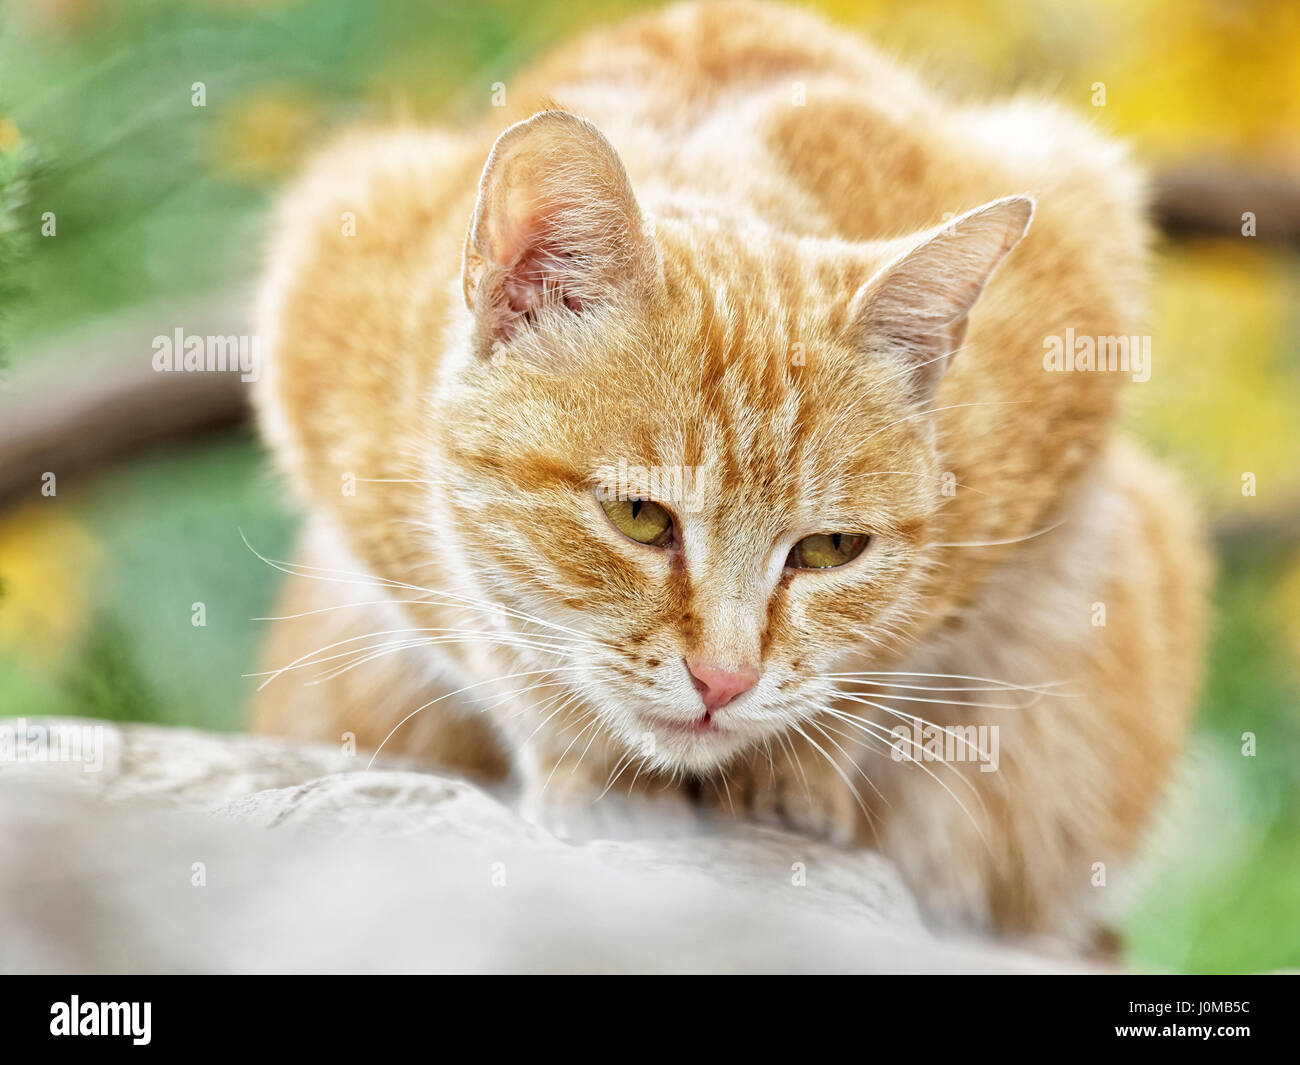 Yellow cat sit in the loaf pose in autumn park, eyes half closed, and its body looks like a love heart. Stock Photo